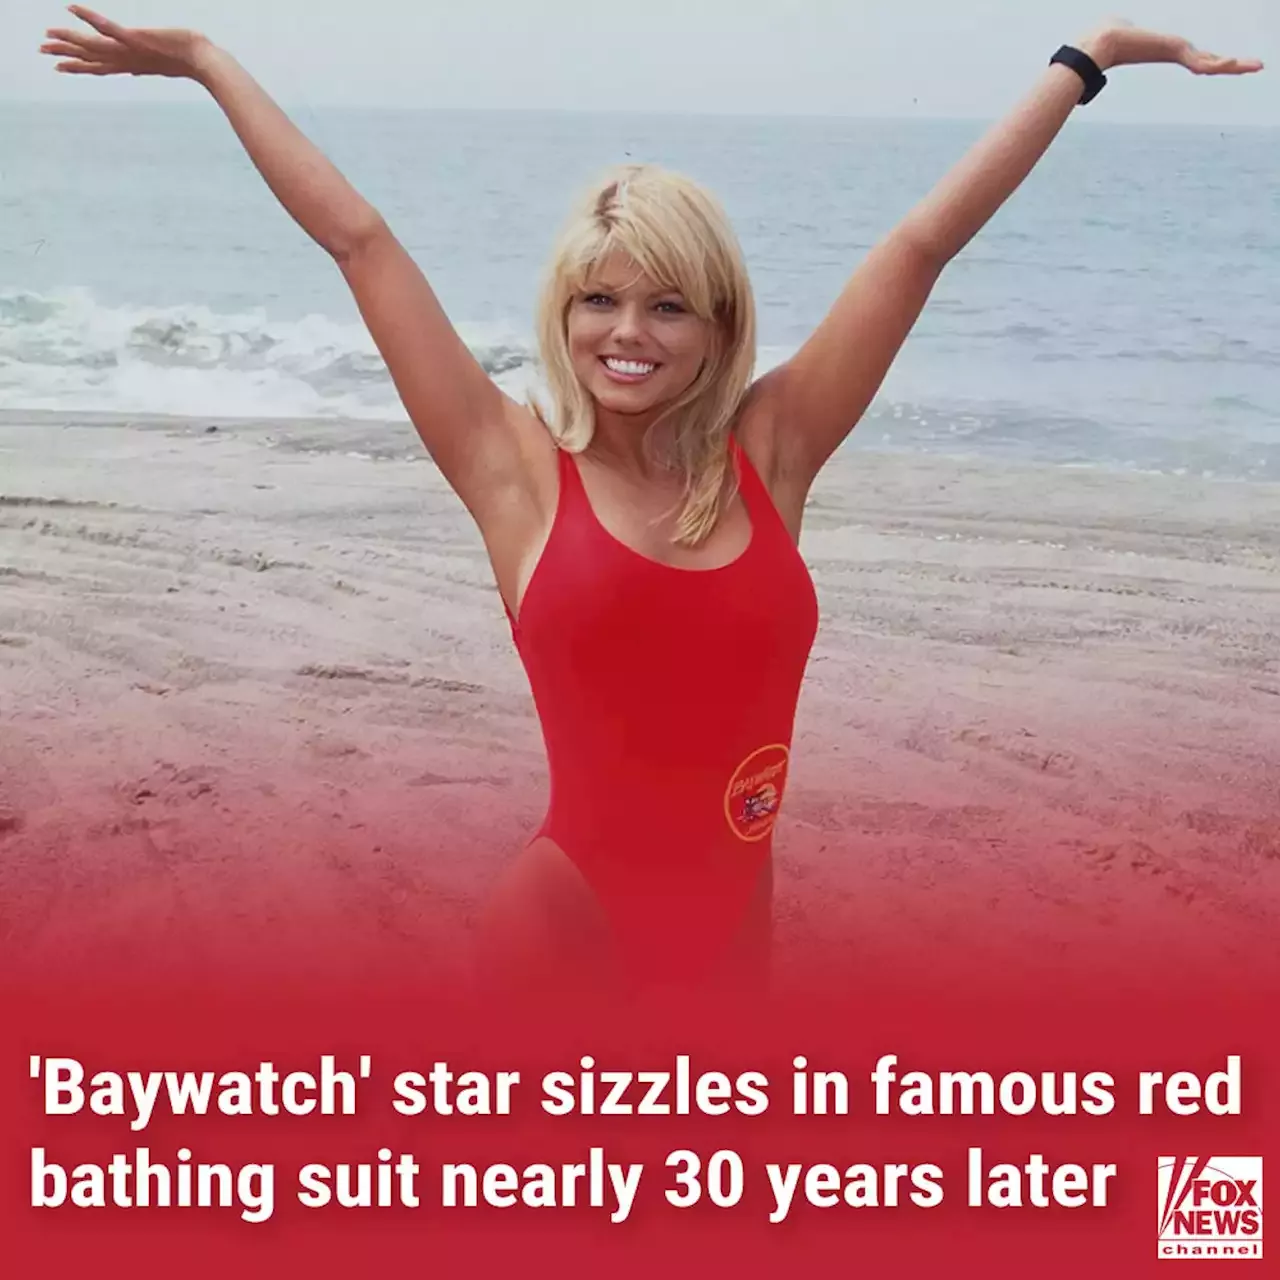 Baywatch Star Donna Derrico 55 Sizzles In Famous Red Bathing Suit Nearly 30 Years Later 